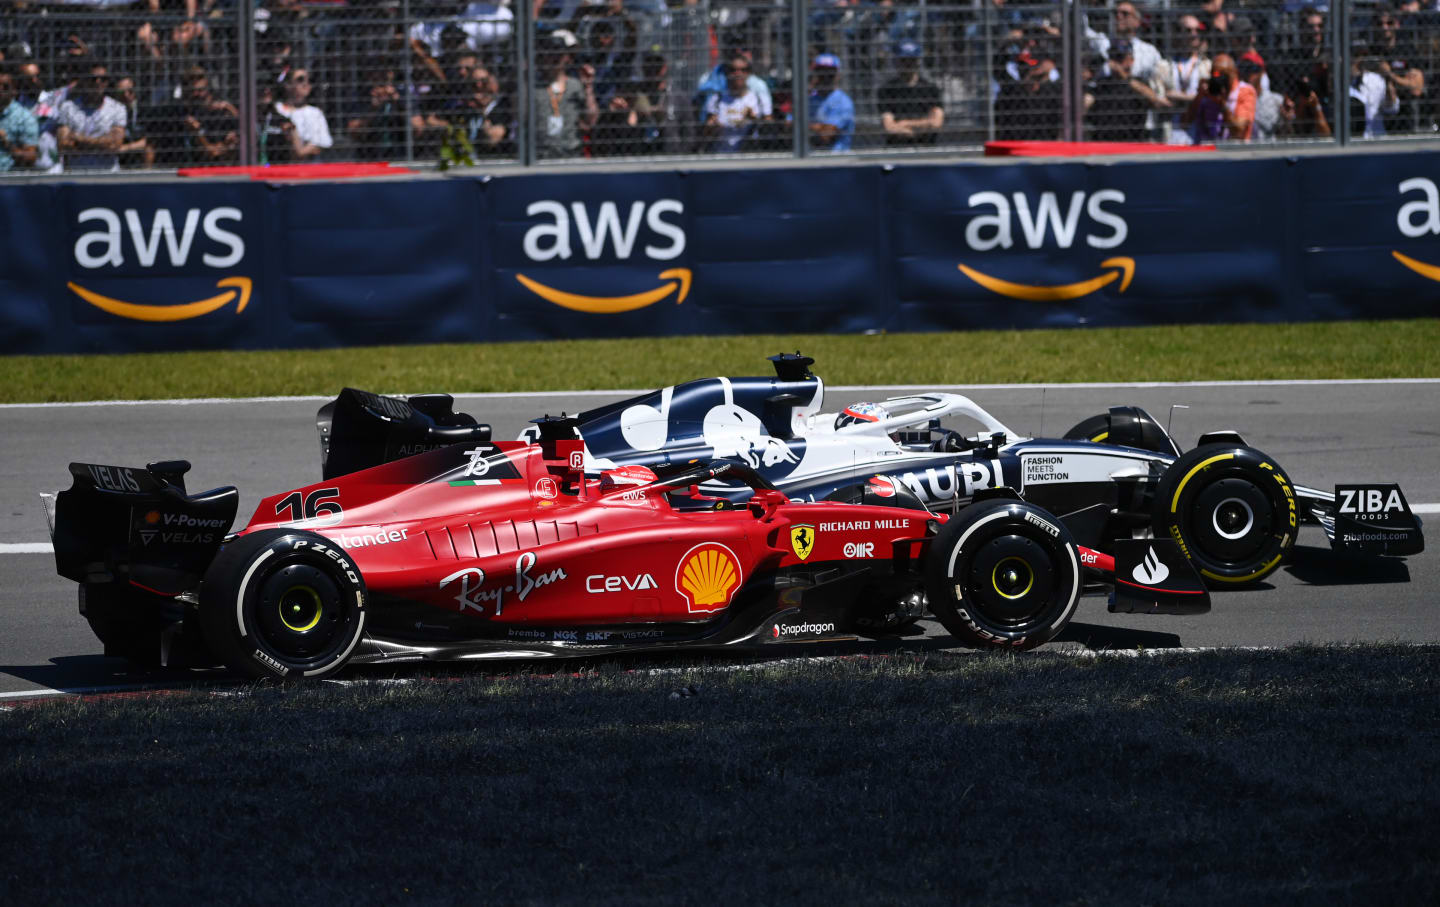 MONTREAL, QUEBEC - JUNE 19: Pierre Gasly of France driving the (10) Scuderia AlphaTauri AT03 leads Charles Leclerc of Monaco driving the (16) Ferrari F1-75 during the F1 Grand Prix of Canada at Circuit Gilles Villeneuve on June 19, 2022 in Montreal, Quebec. (Photo by Dan Mullan/Getty Images)